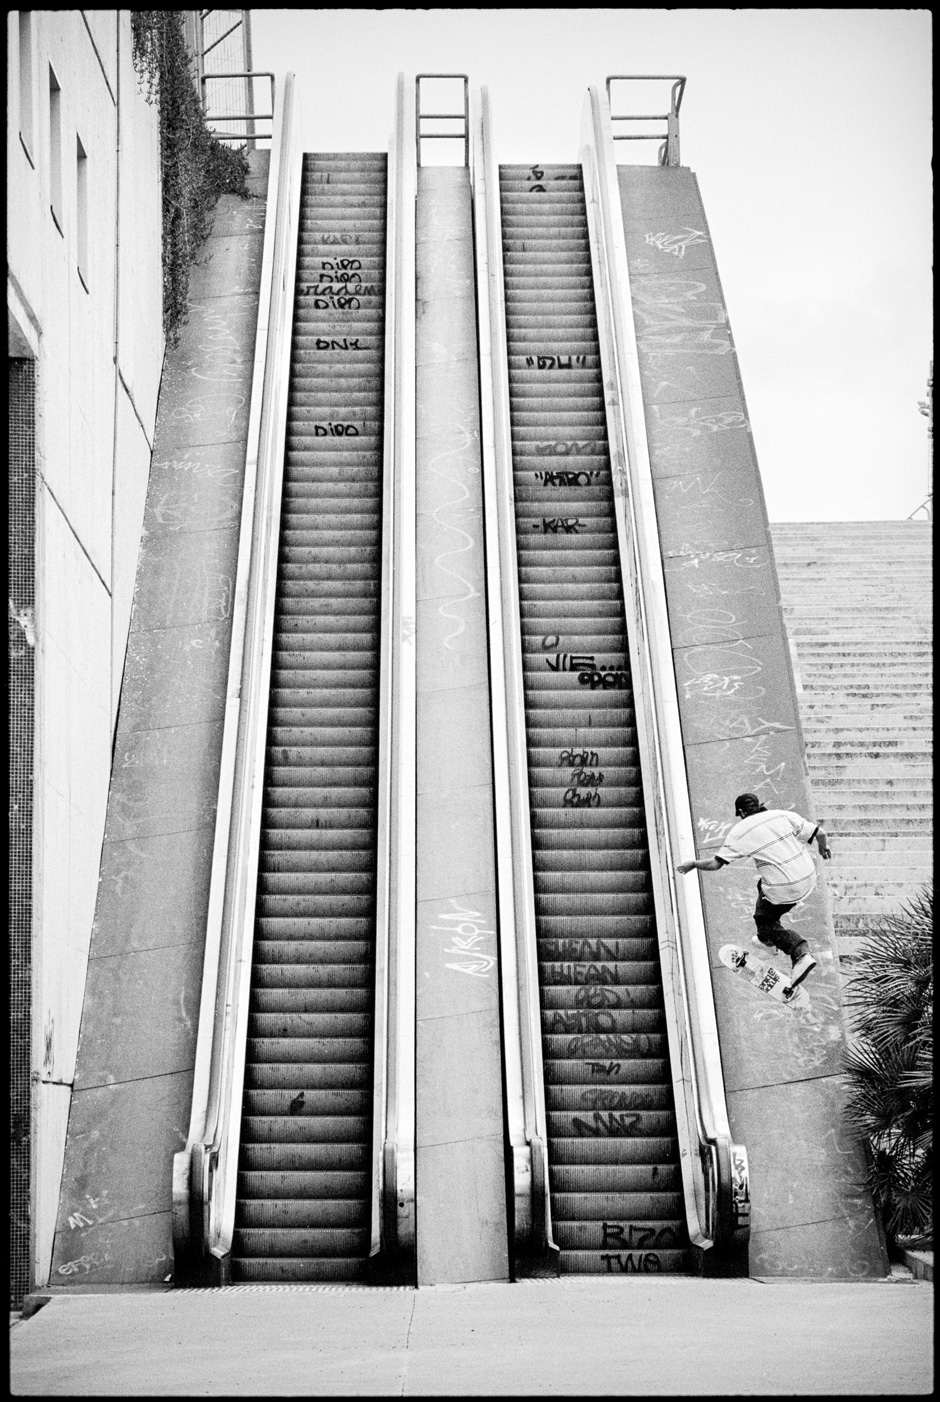 This spot at Montbau in Barcelona housed some heavy Static II sessions. Photo by Sam Ashley